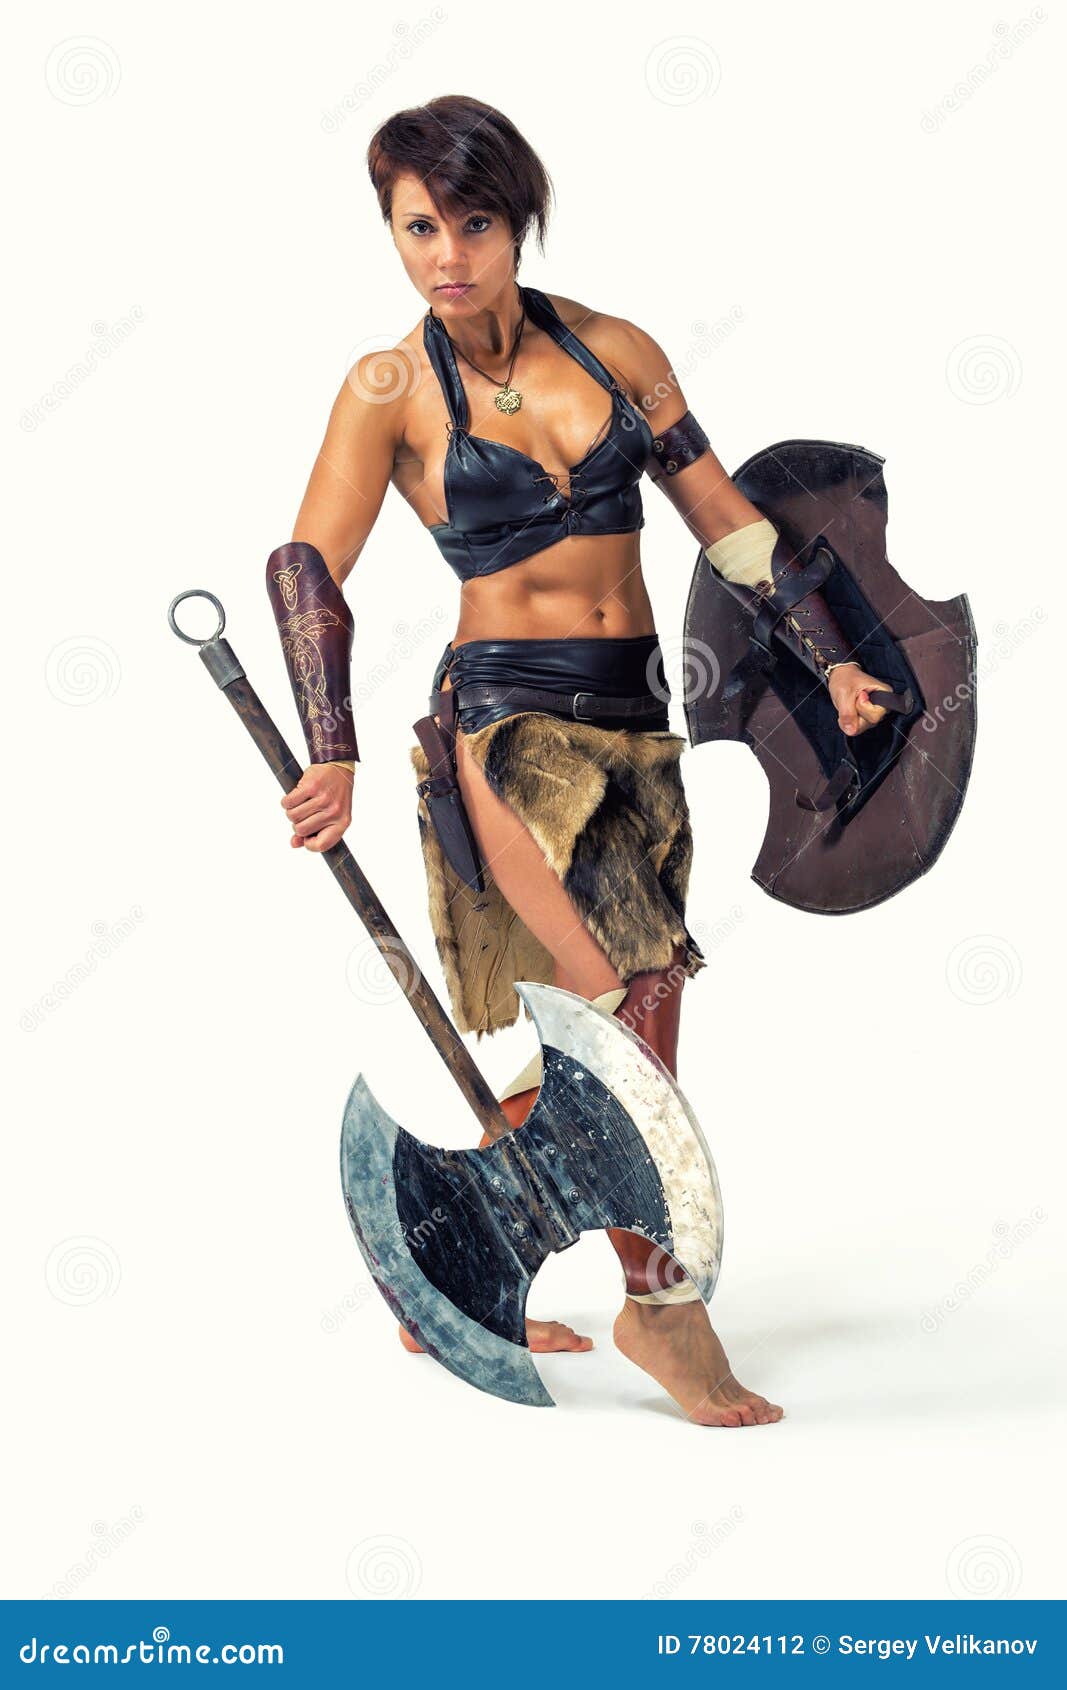 Warrior Women of the Ancient World